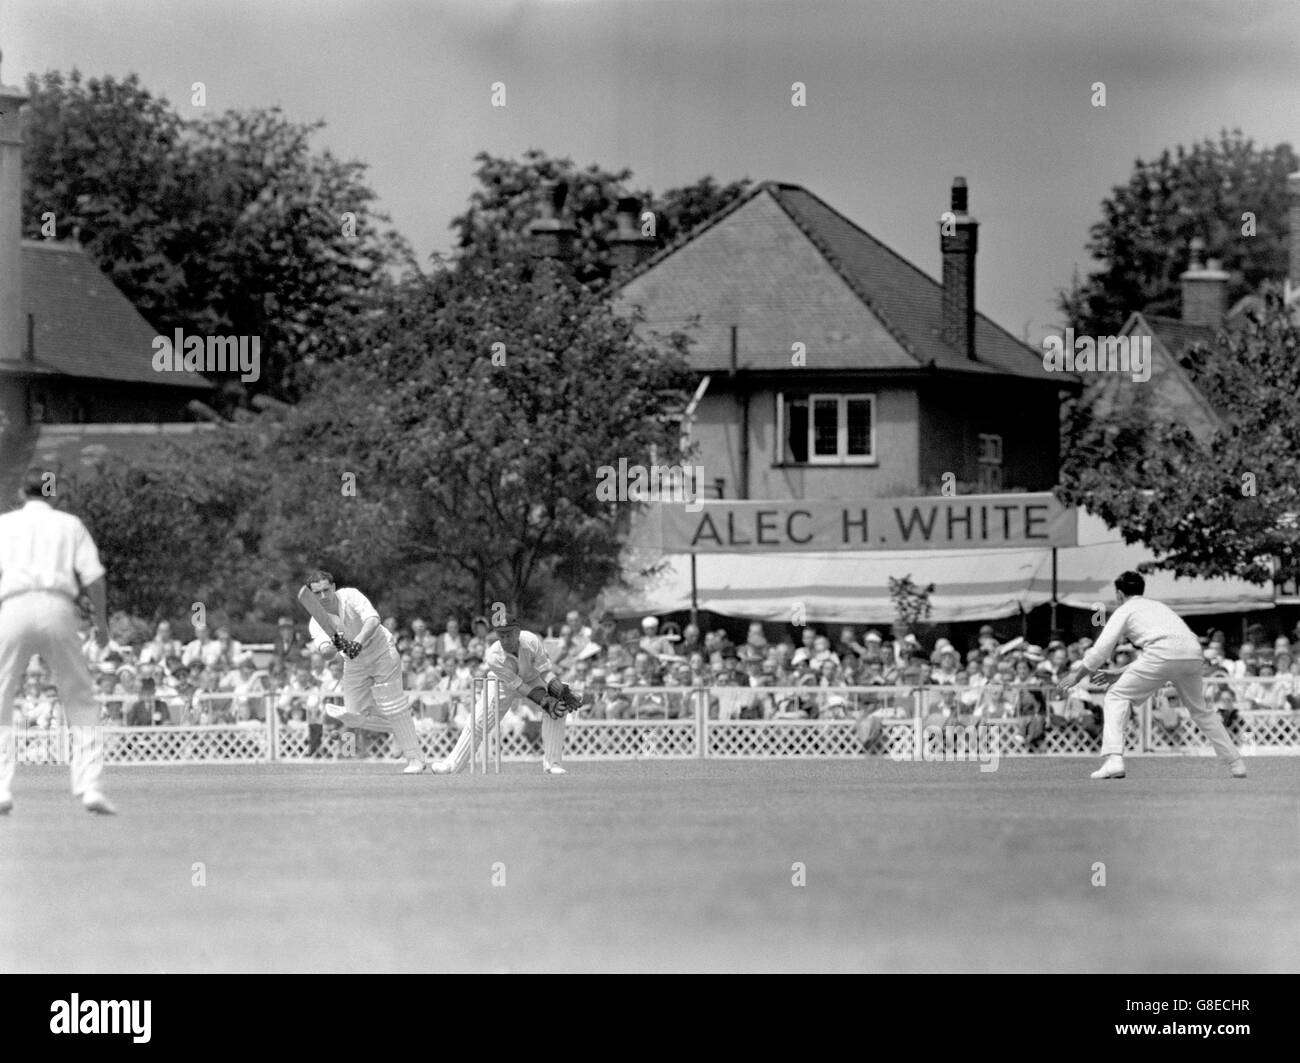 Warwickshire's Alan Townsend (c, l) clips the ball off his pads, watched by Essex wicketkeeper Tom Wade (c, r) Stock Photo